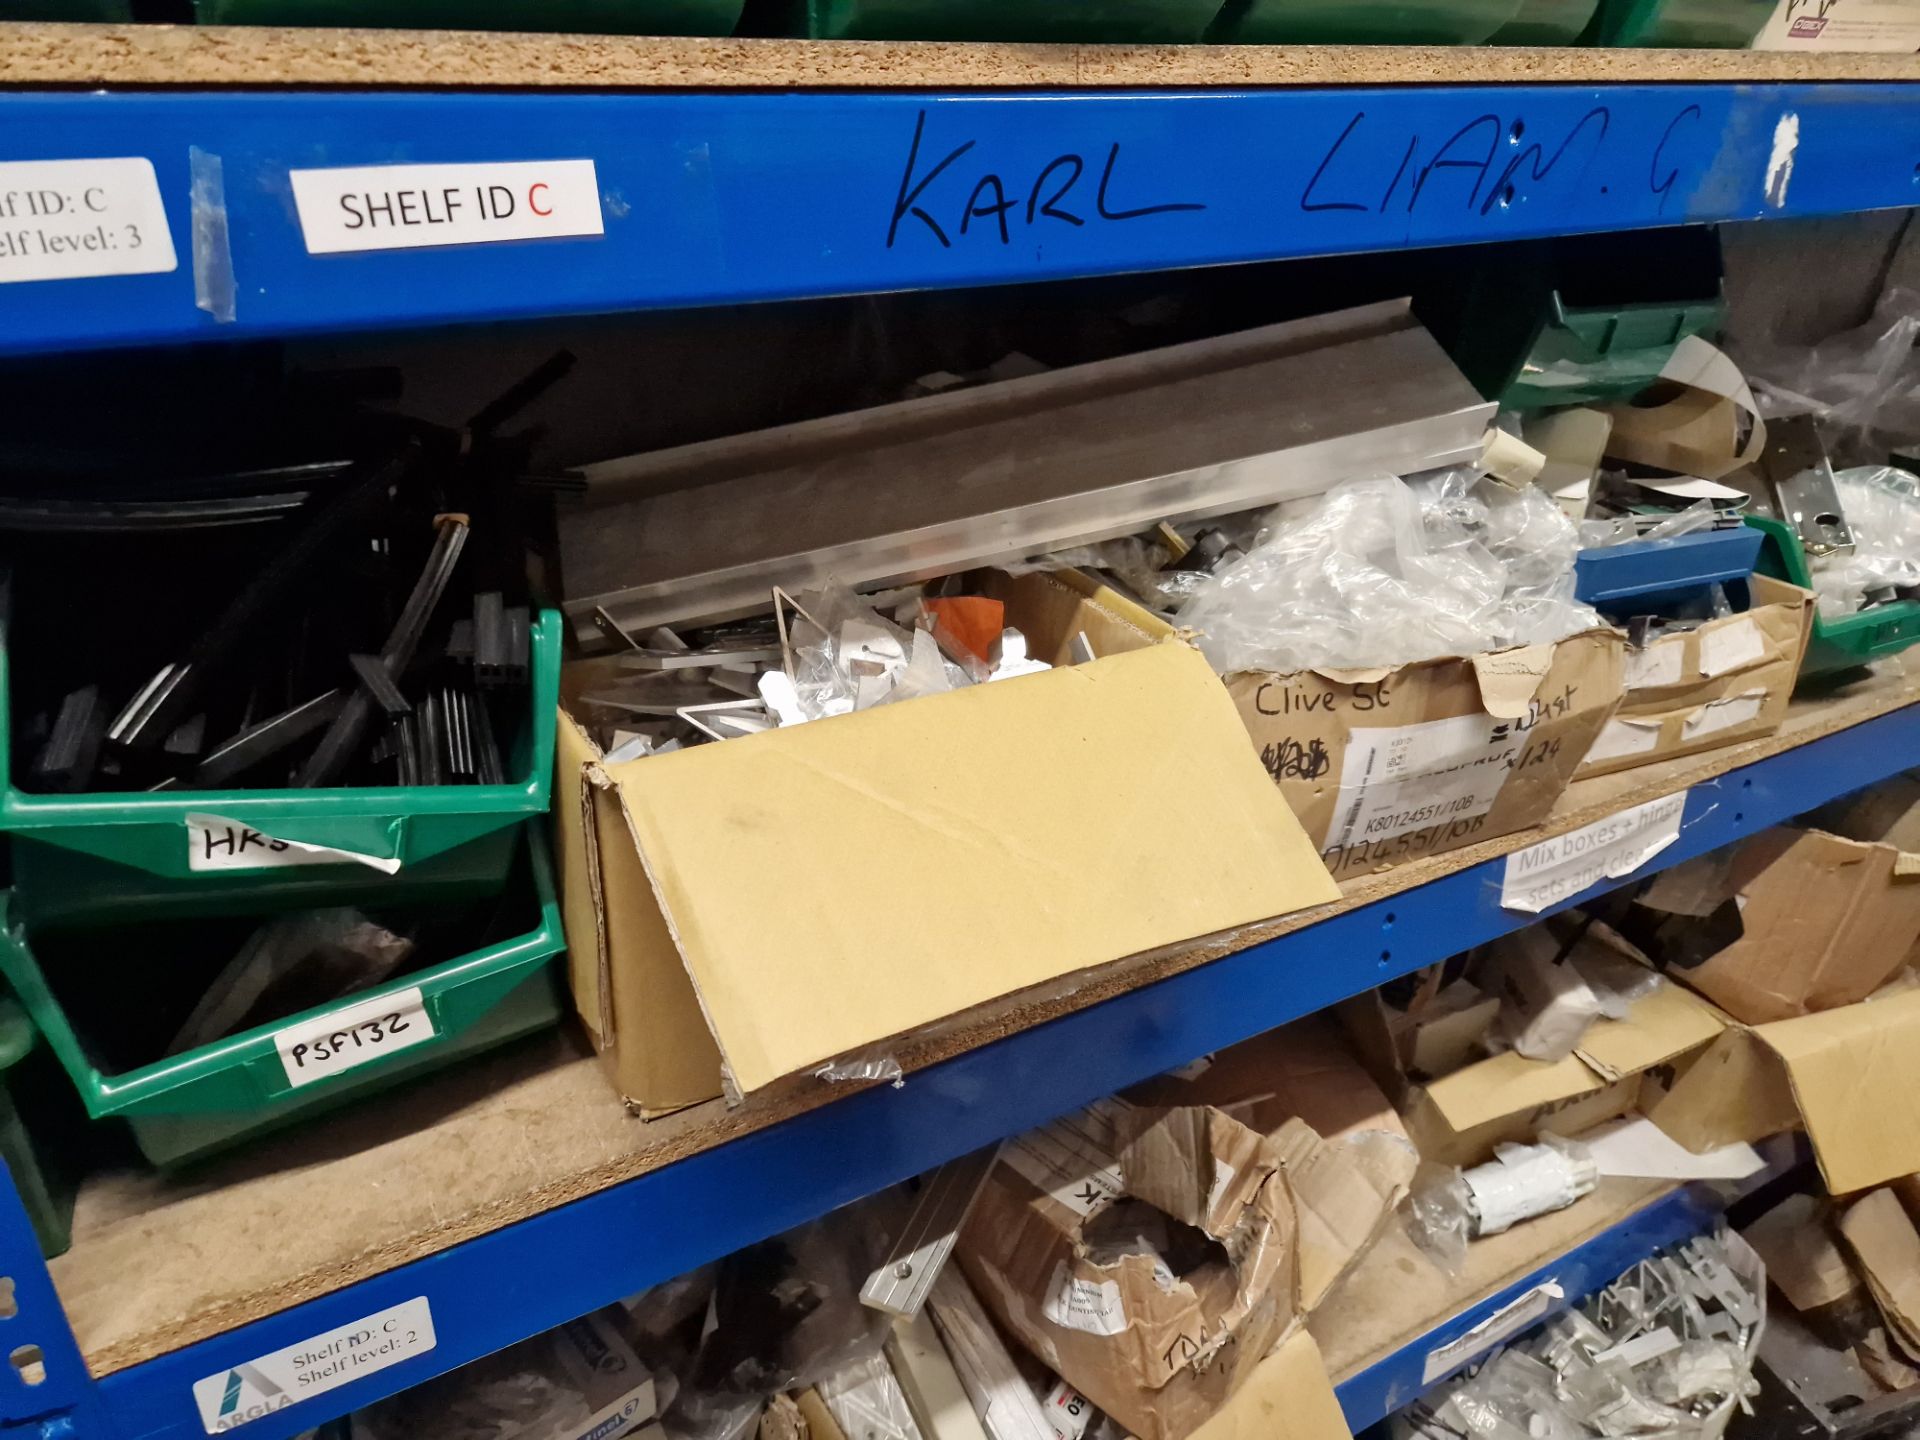 Contents to Two Bays of Shelving, including Rubber Gaskets, Aluminium Profile, End Caps, Screws, - Image 8 of 11